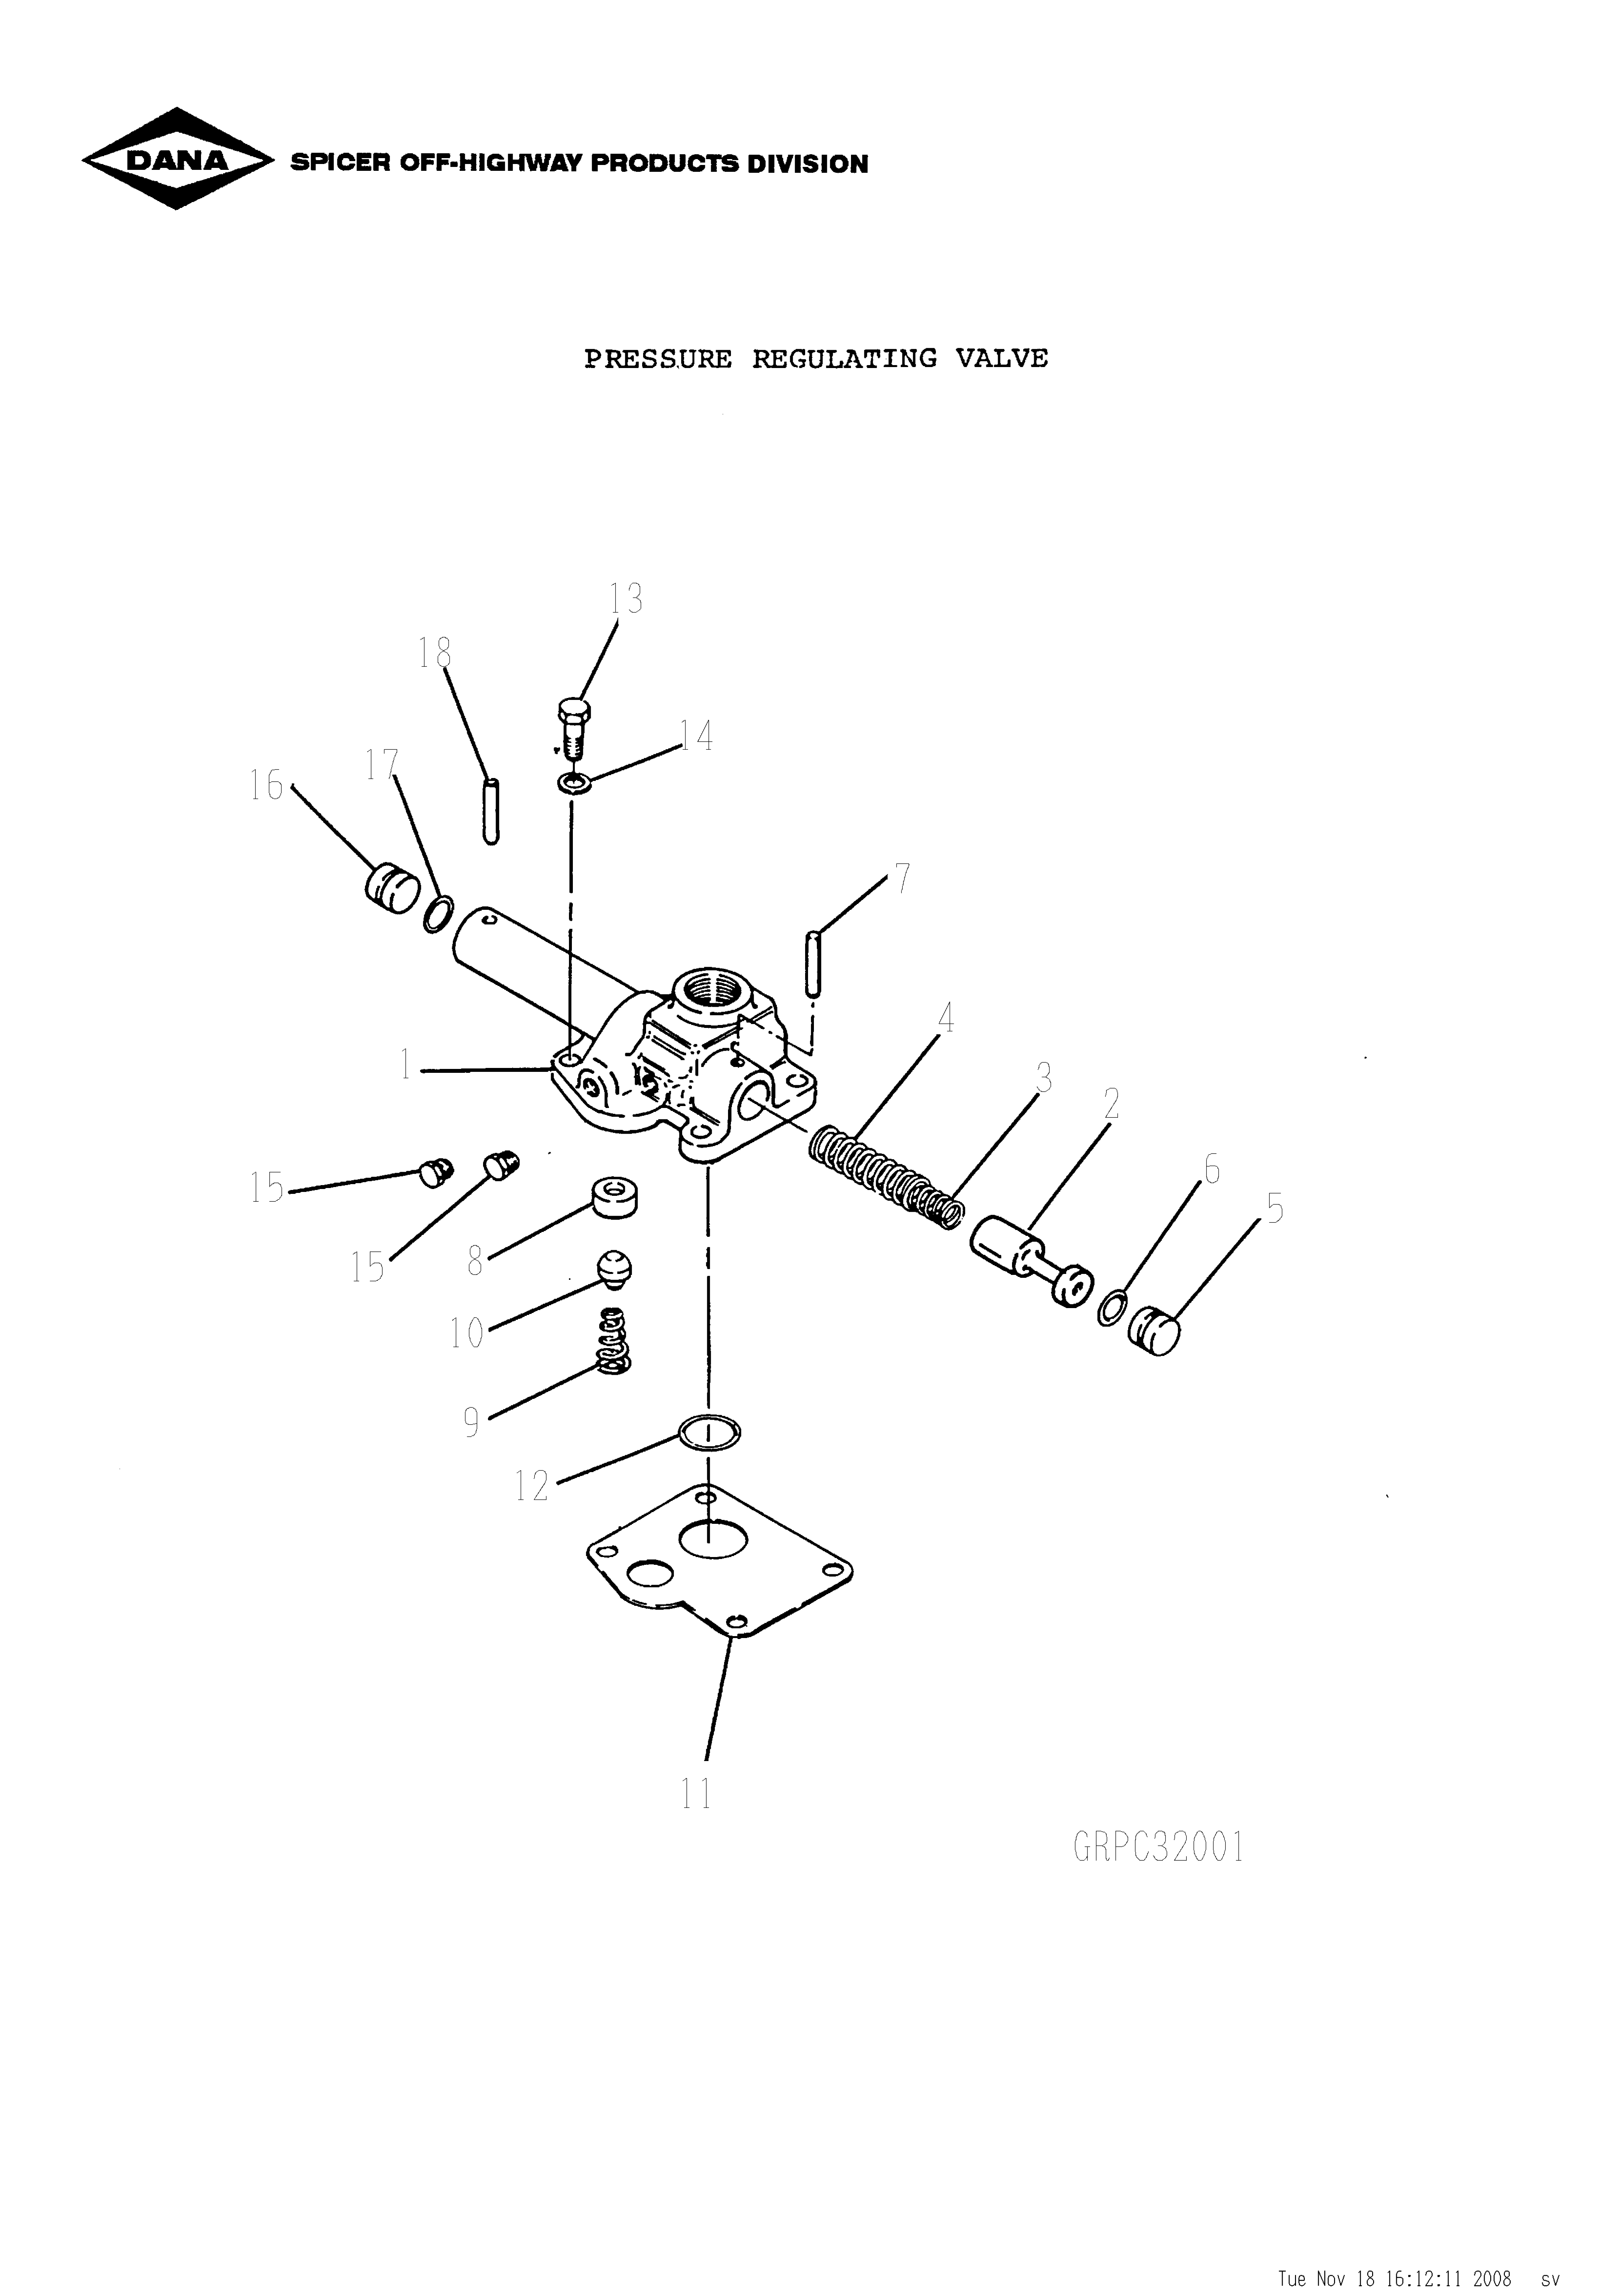 drawing for TELEDYNE SPECIALITY EQUIPMENT 1004527 - GASKET (figure 1)